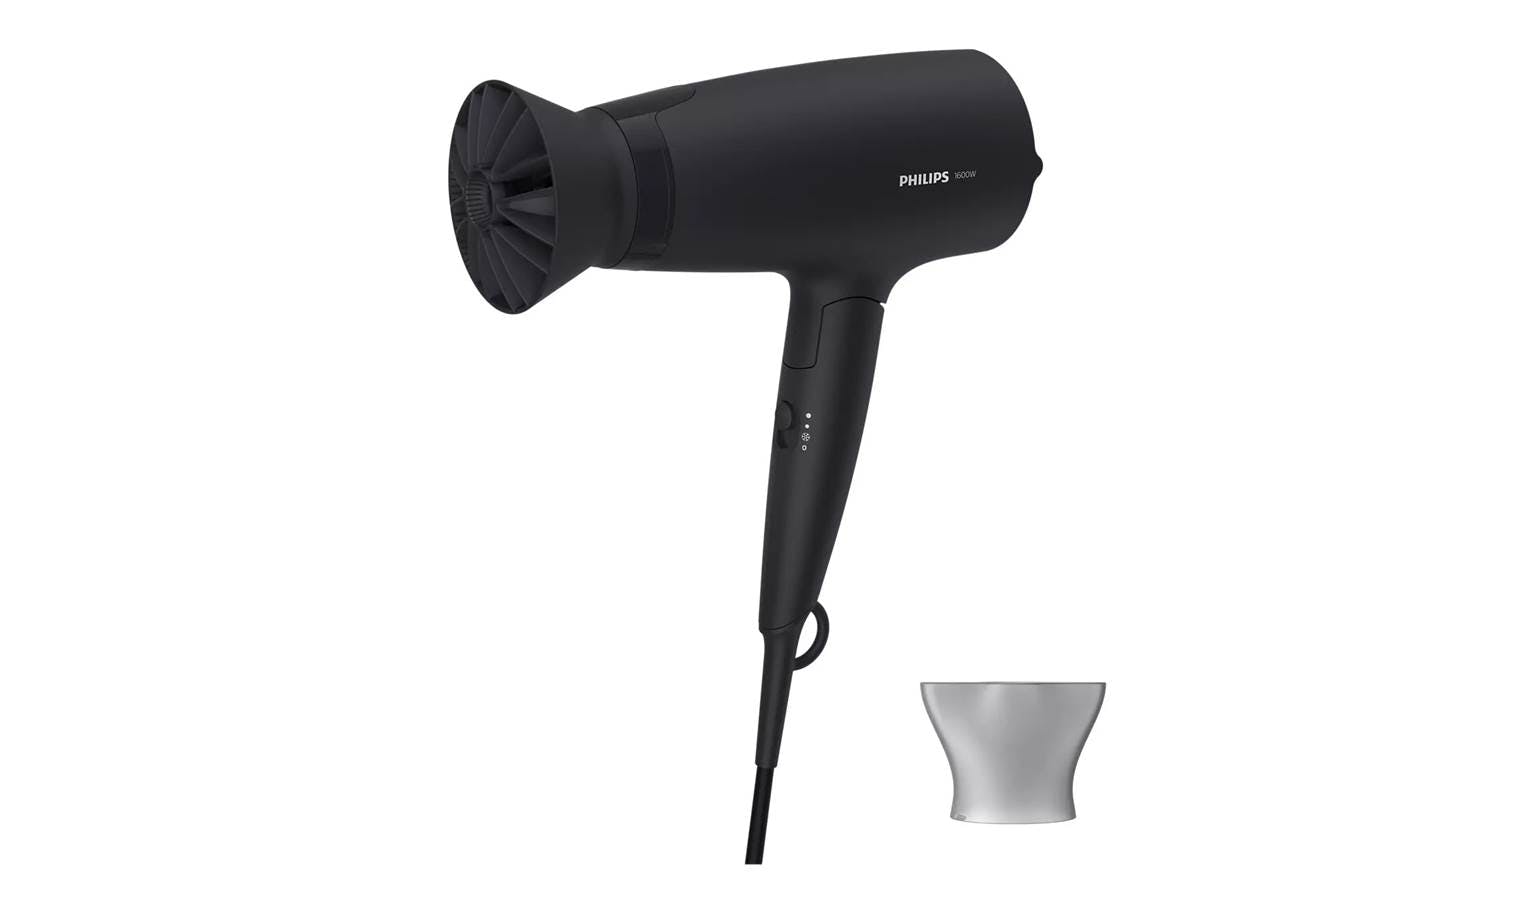 https://hnsgsfp.imgix.net/9/images/detailed/61/Philips_3000_Hair_Dryer_(BHD-308).jpg?fit=fill&bg=0FFF&w=1536&h=900&auto=format,compress